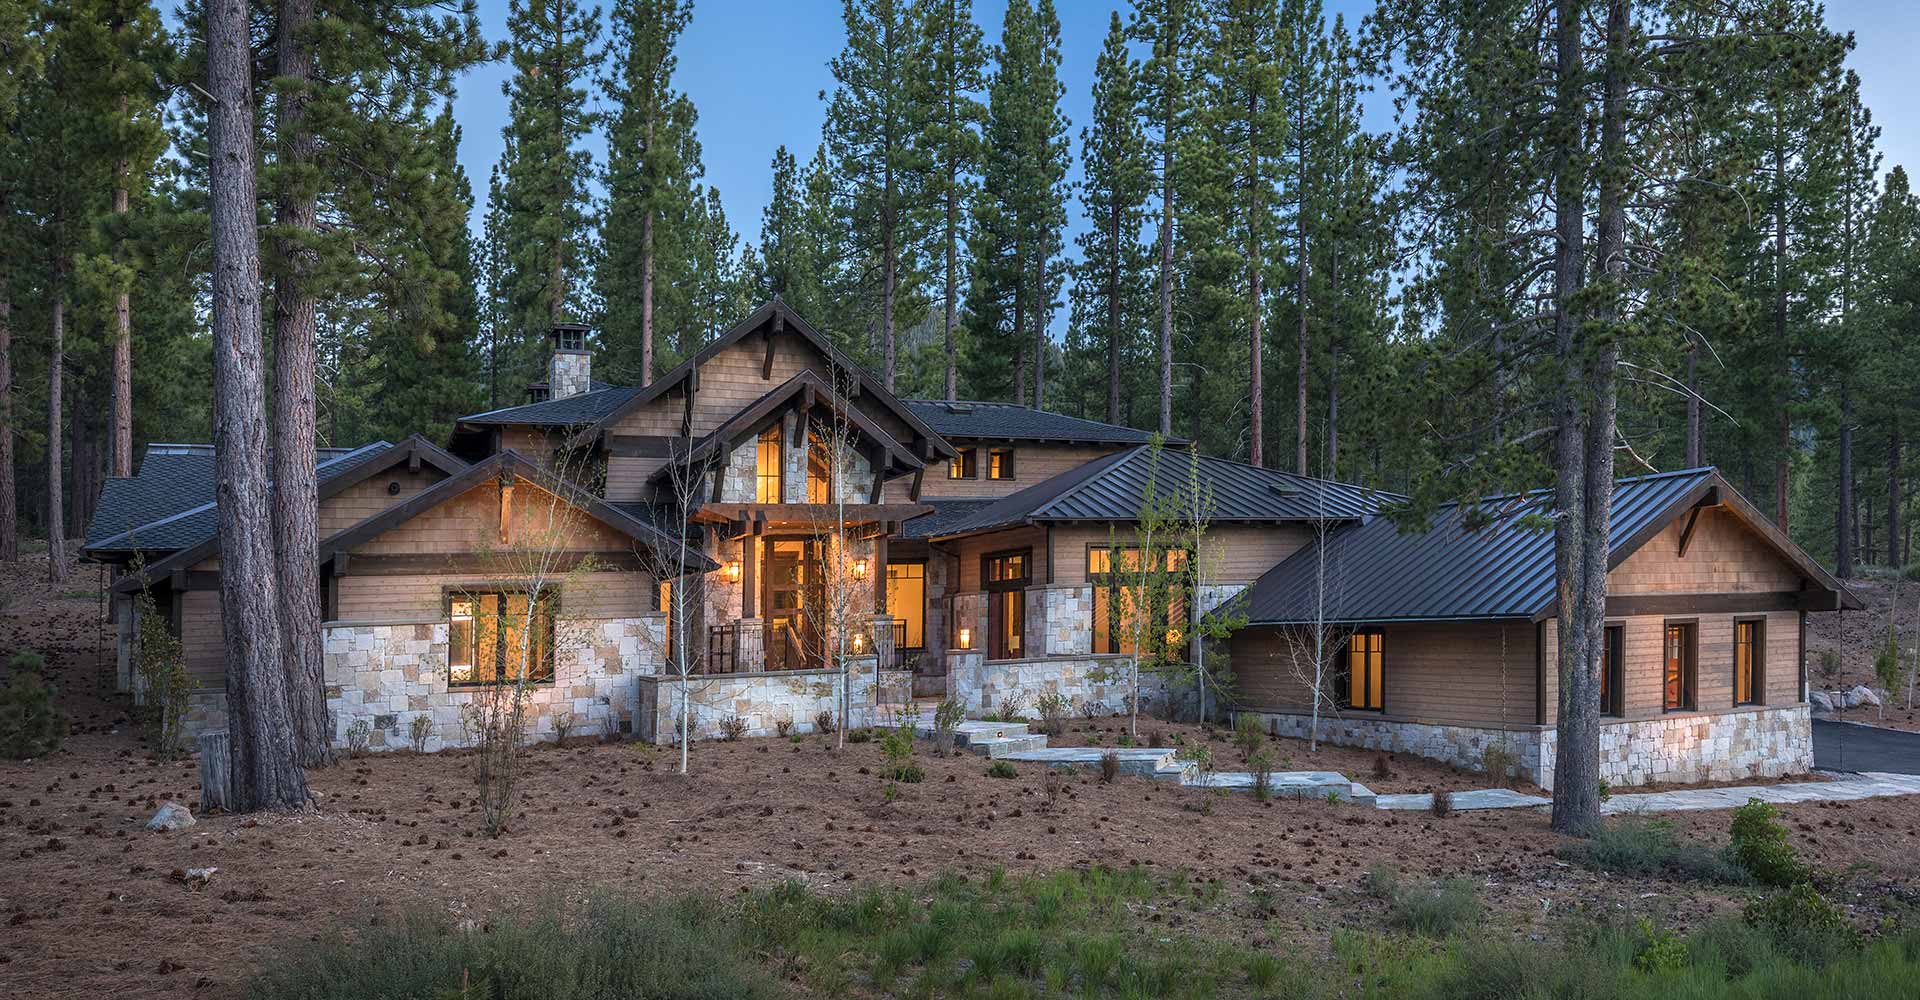 Truckee Luxury Homes For Sale